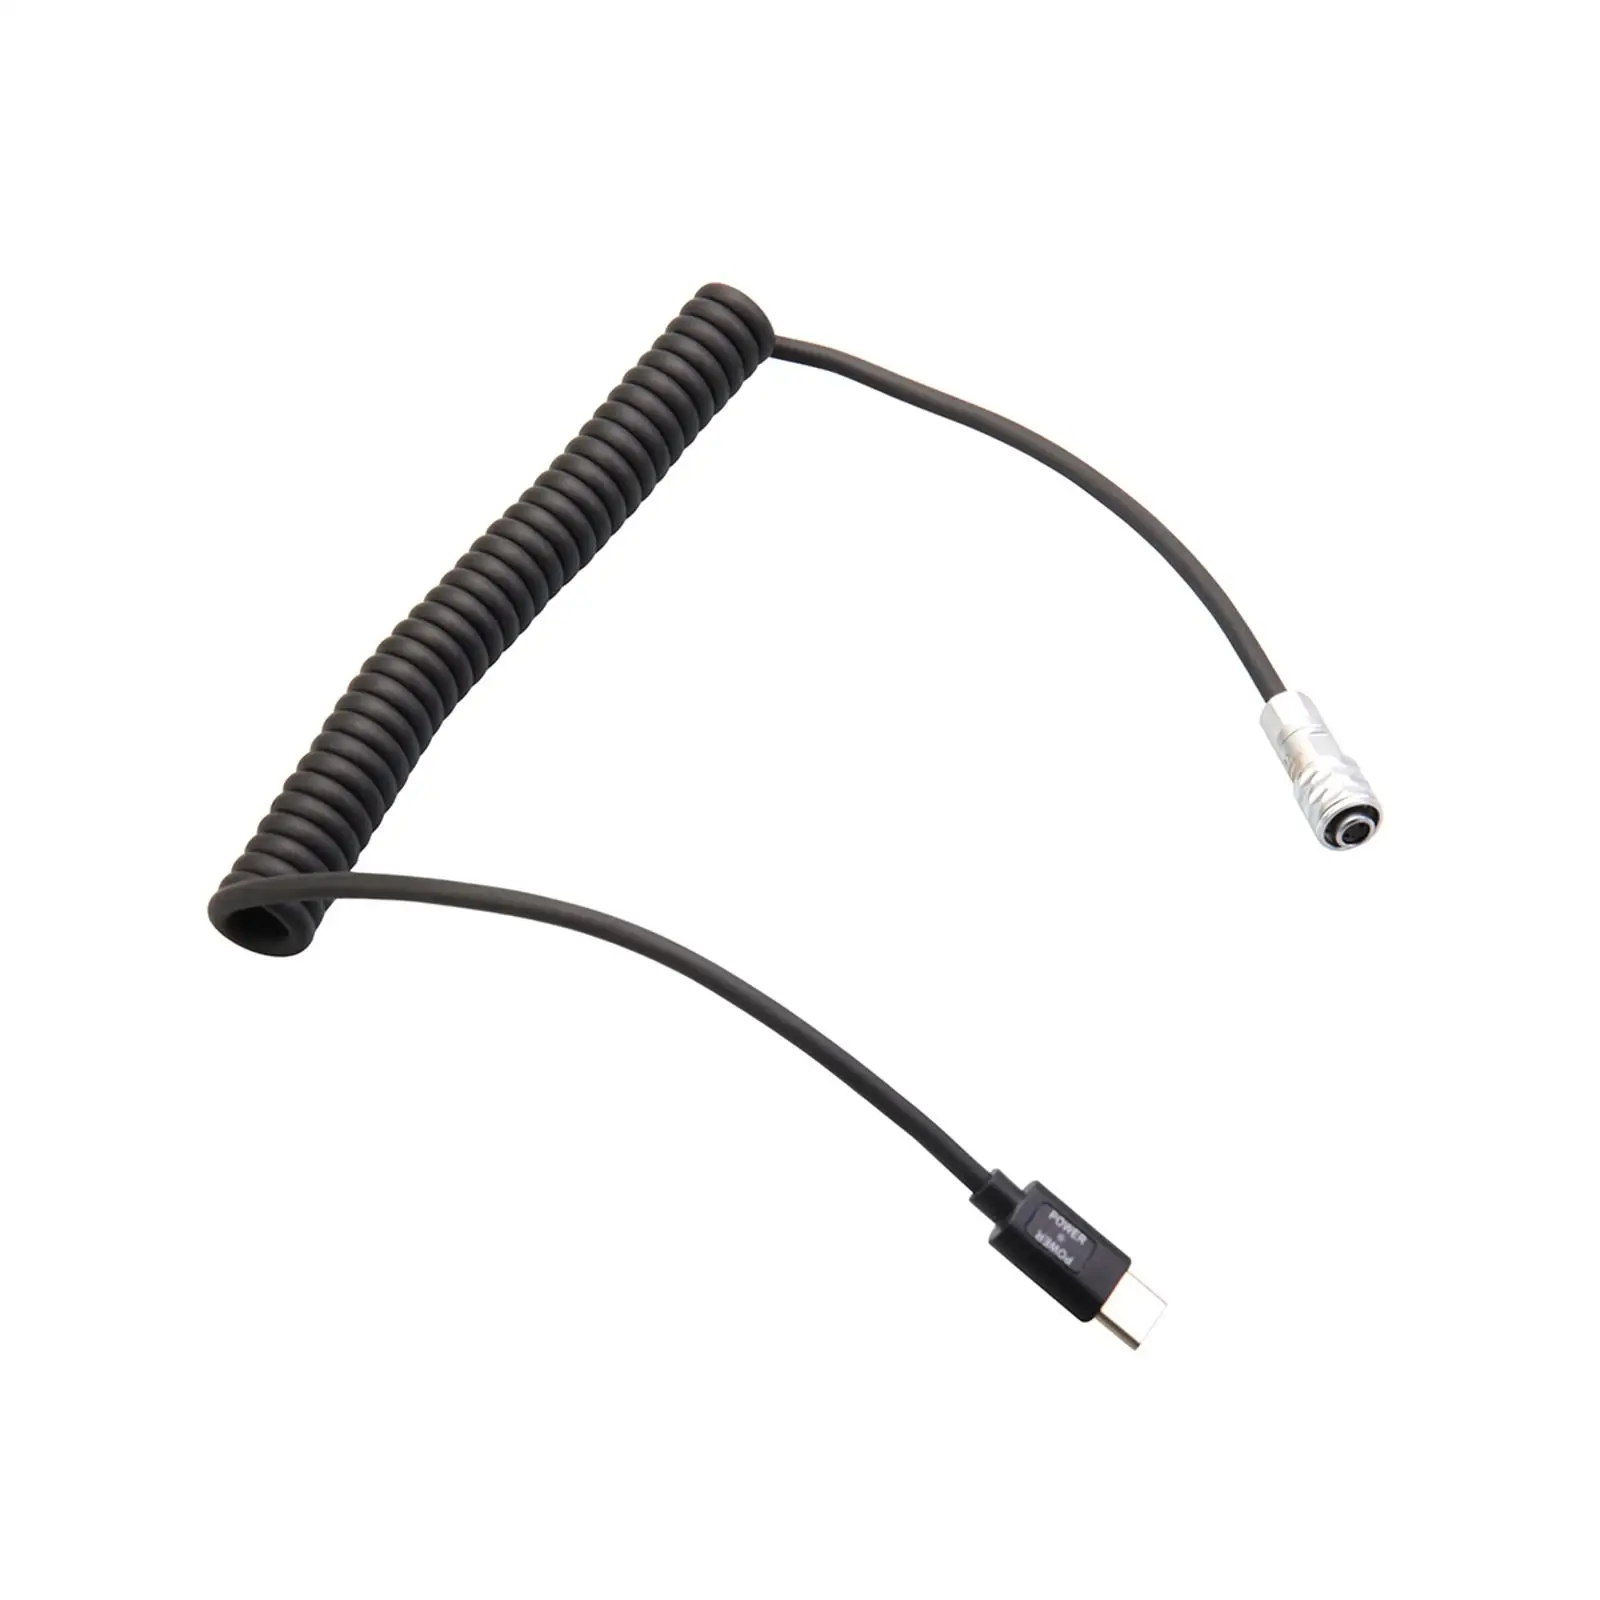  PD , 2Pin to  Camera Battery Power Cable for Bmpcc 4K 6K Cameras, Camera , Cable ,usb PD Devices